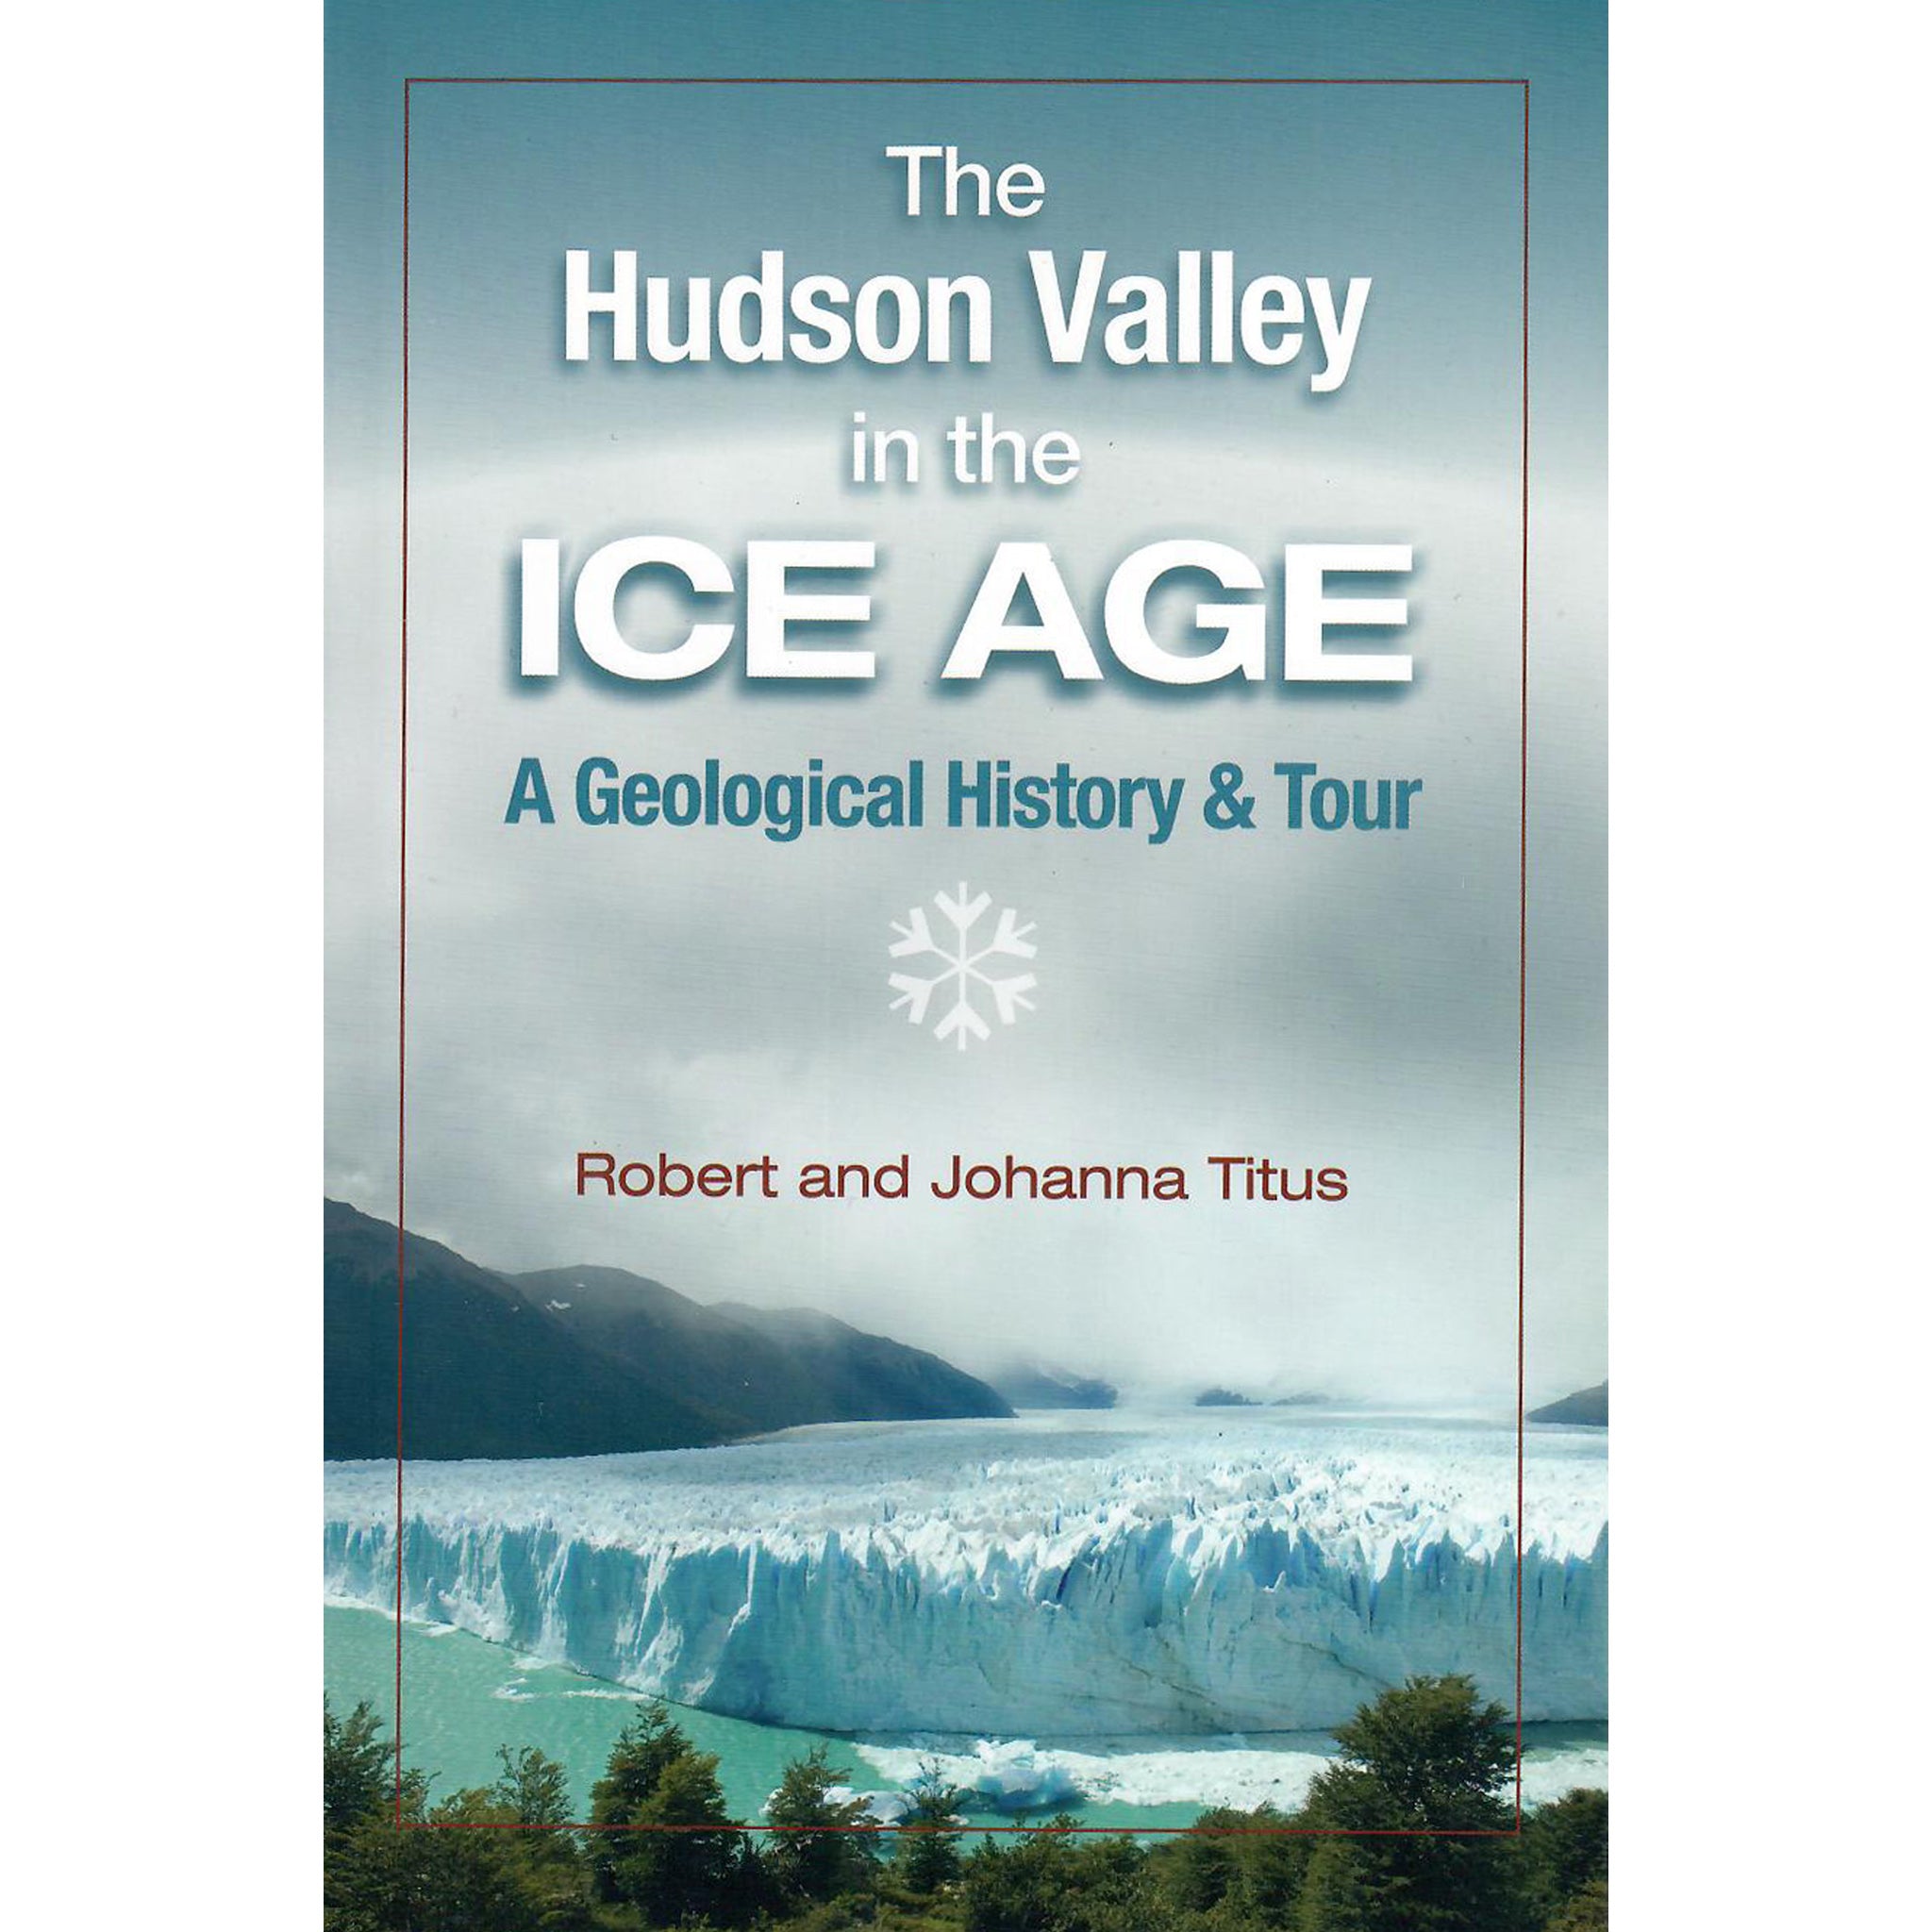 The Hudson Valley in the Ice Age